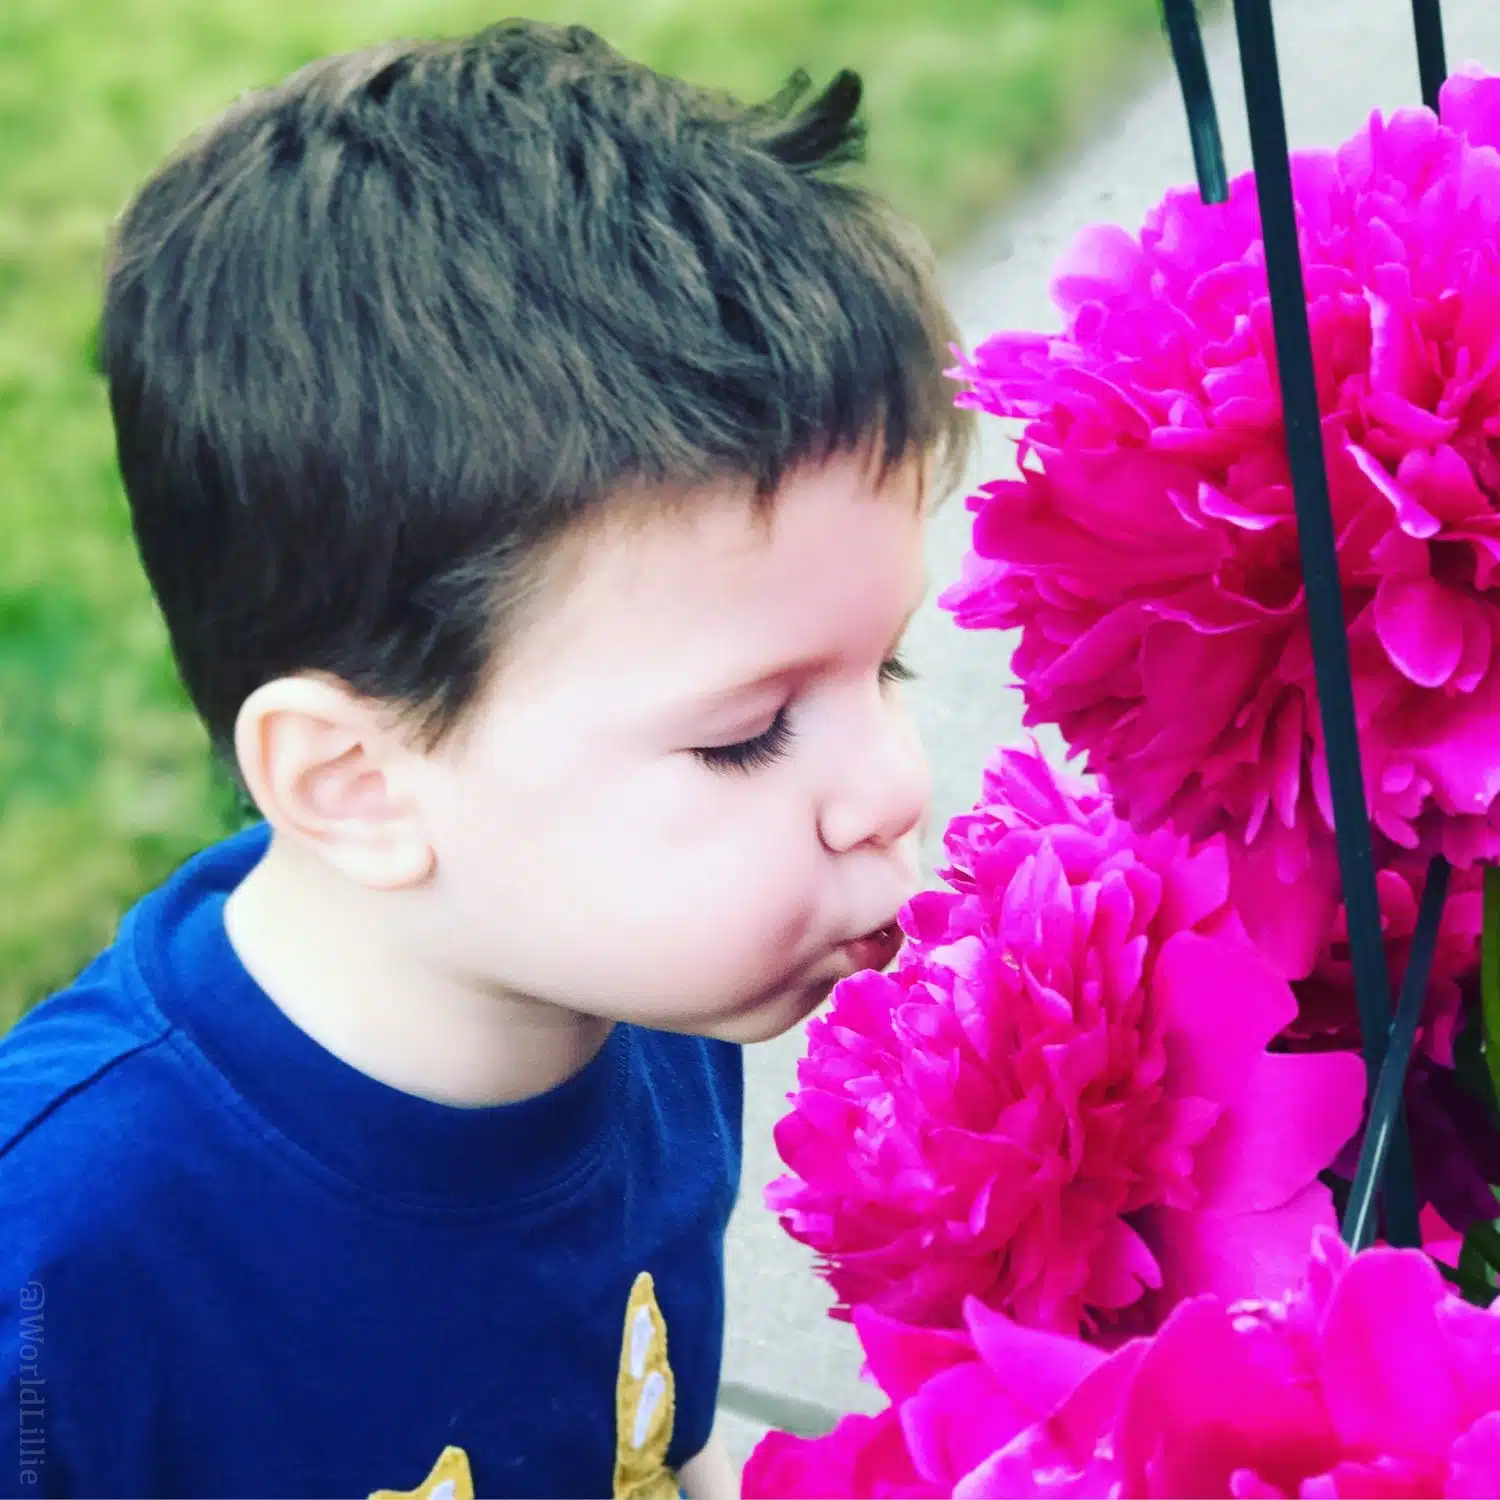 Kissing the flowers.